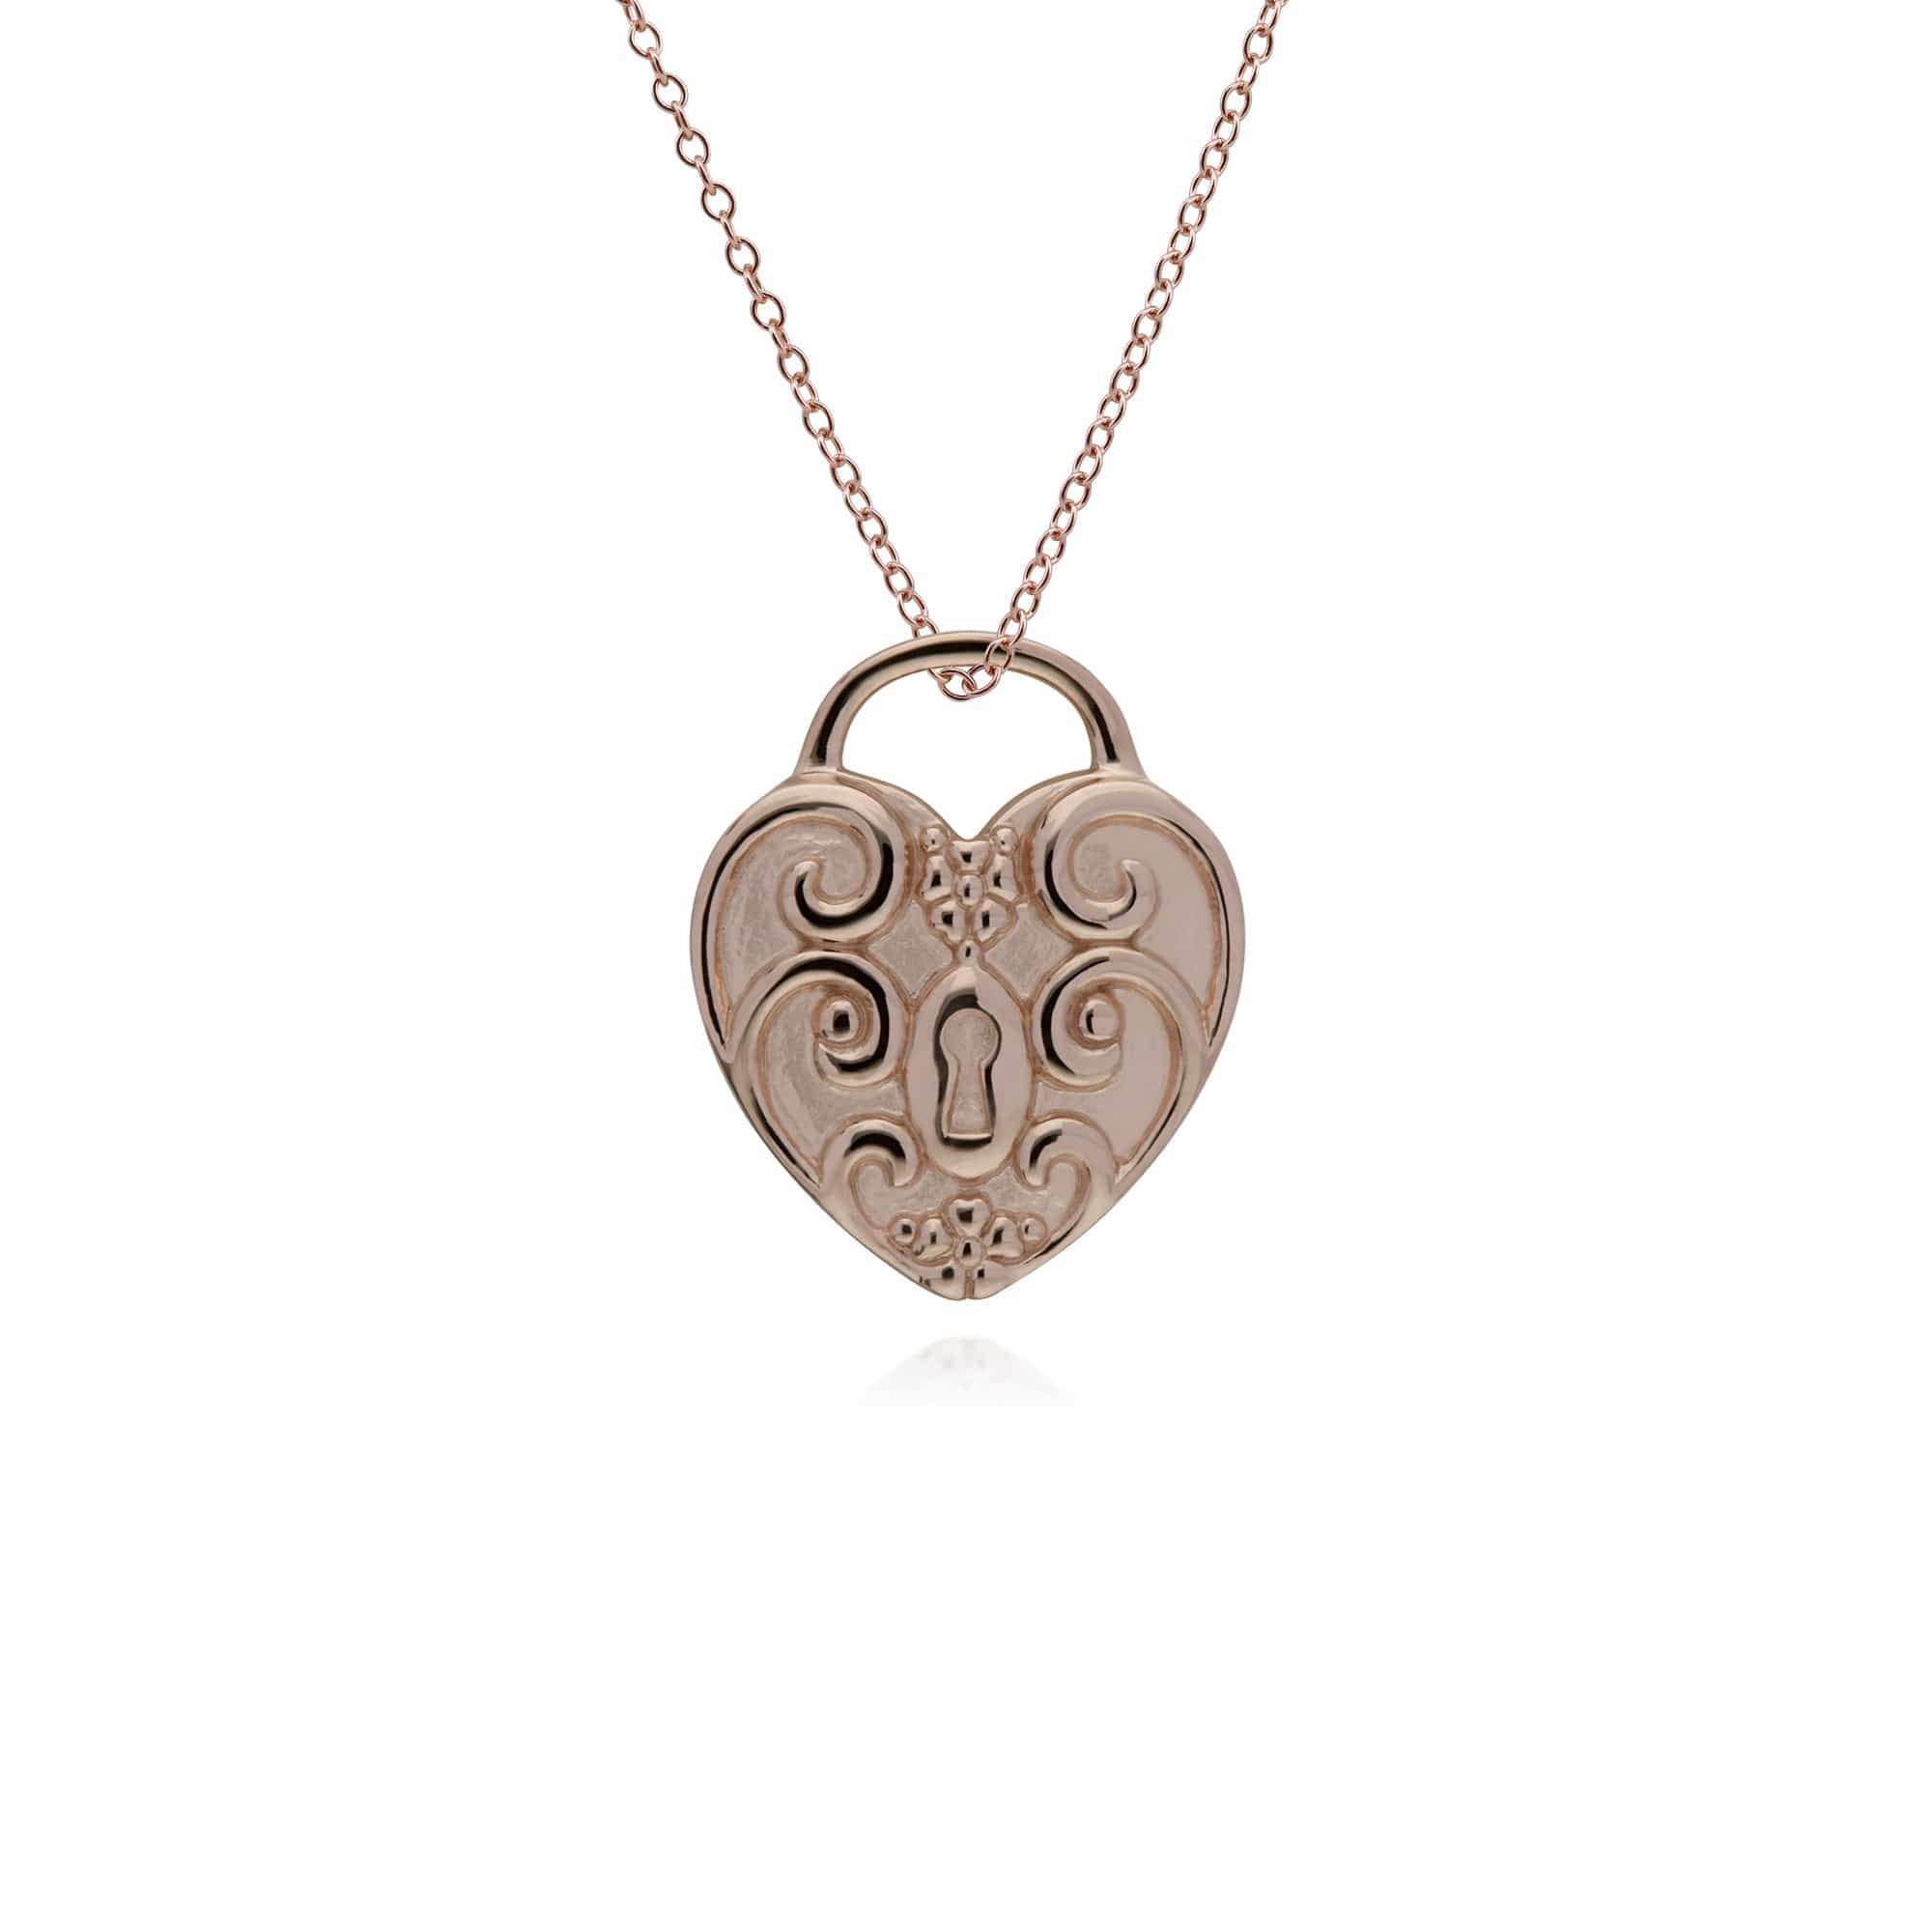 270P028602925-270P026501925 Classic Swirl Heart Lock Pendant & Opal Key Charm in Rose Gold Plated 925 Sterling Silver 3